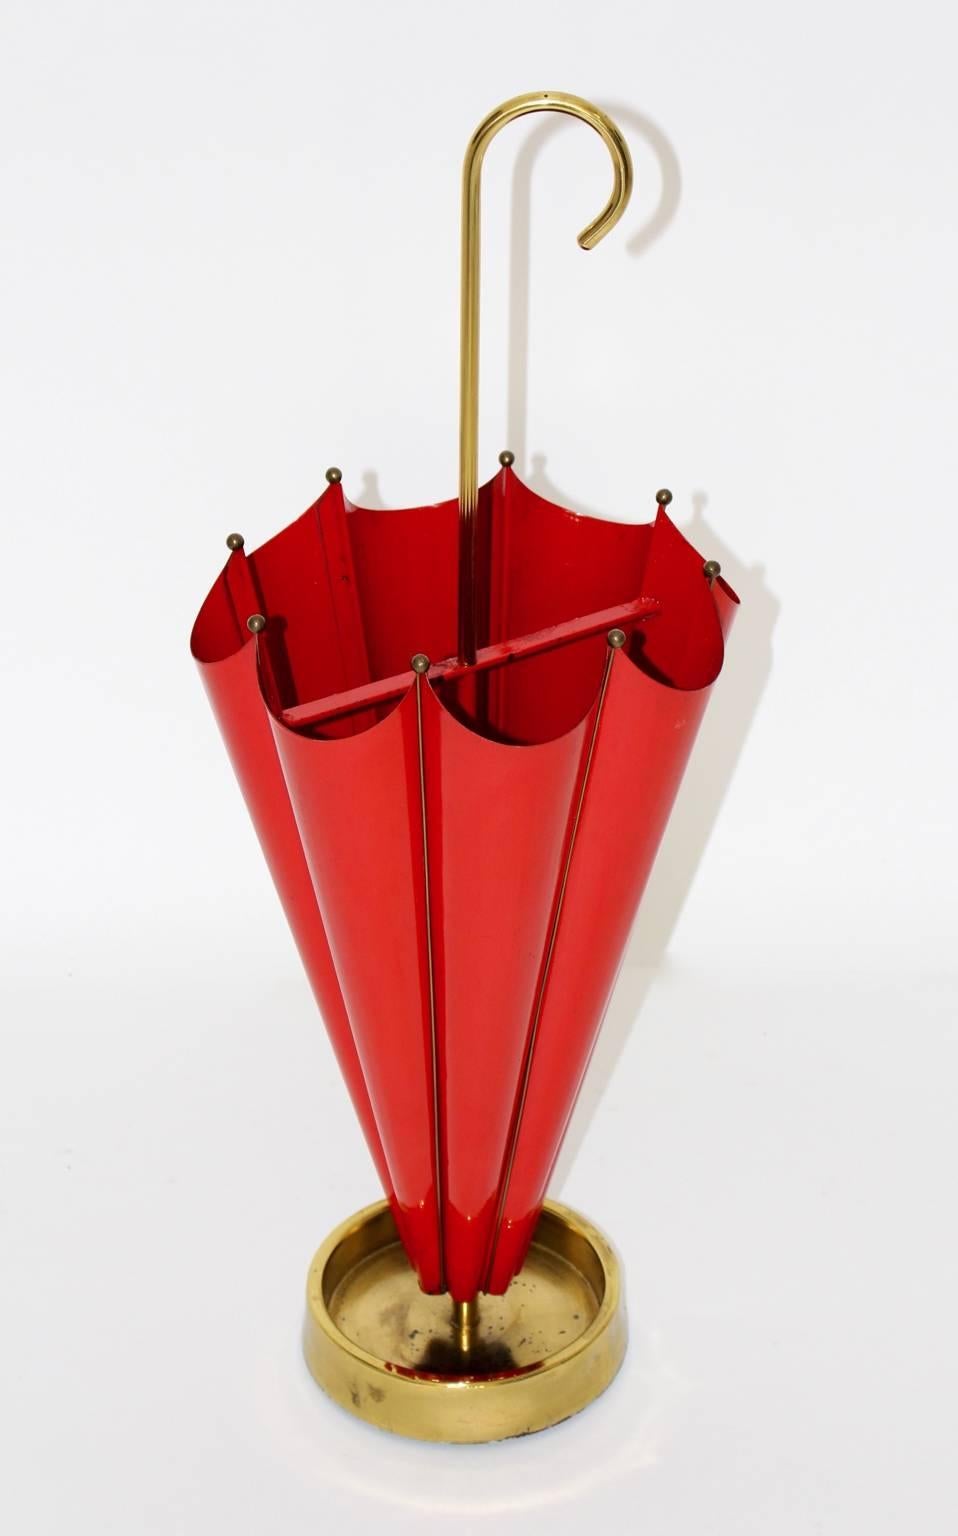 Charming umbrella stand from the 1950s, Italy, shaped like an umbrella, Mid-Century Modern.

The body is made of sheet metal red lacquered with a brassed cast iron foot.
Carefully cleaned.
Very good condition with minor signs of age and use.